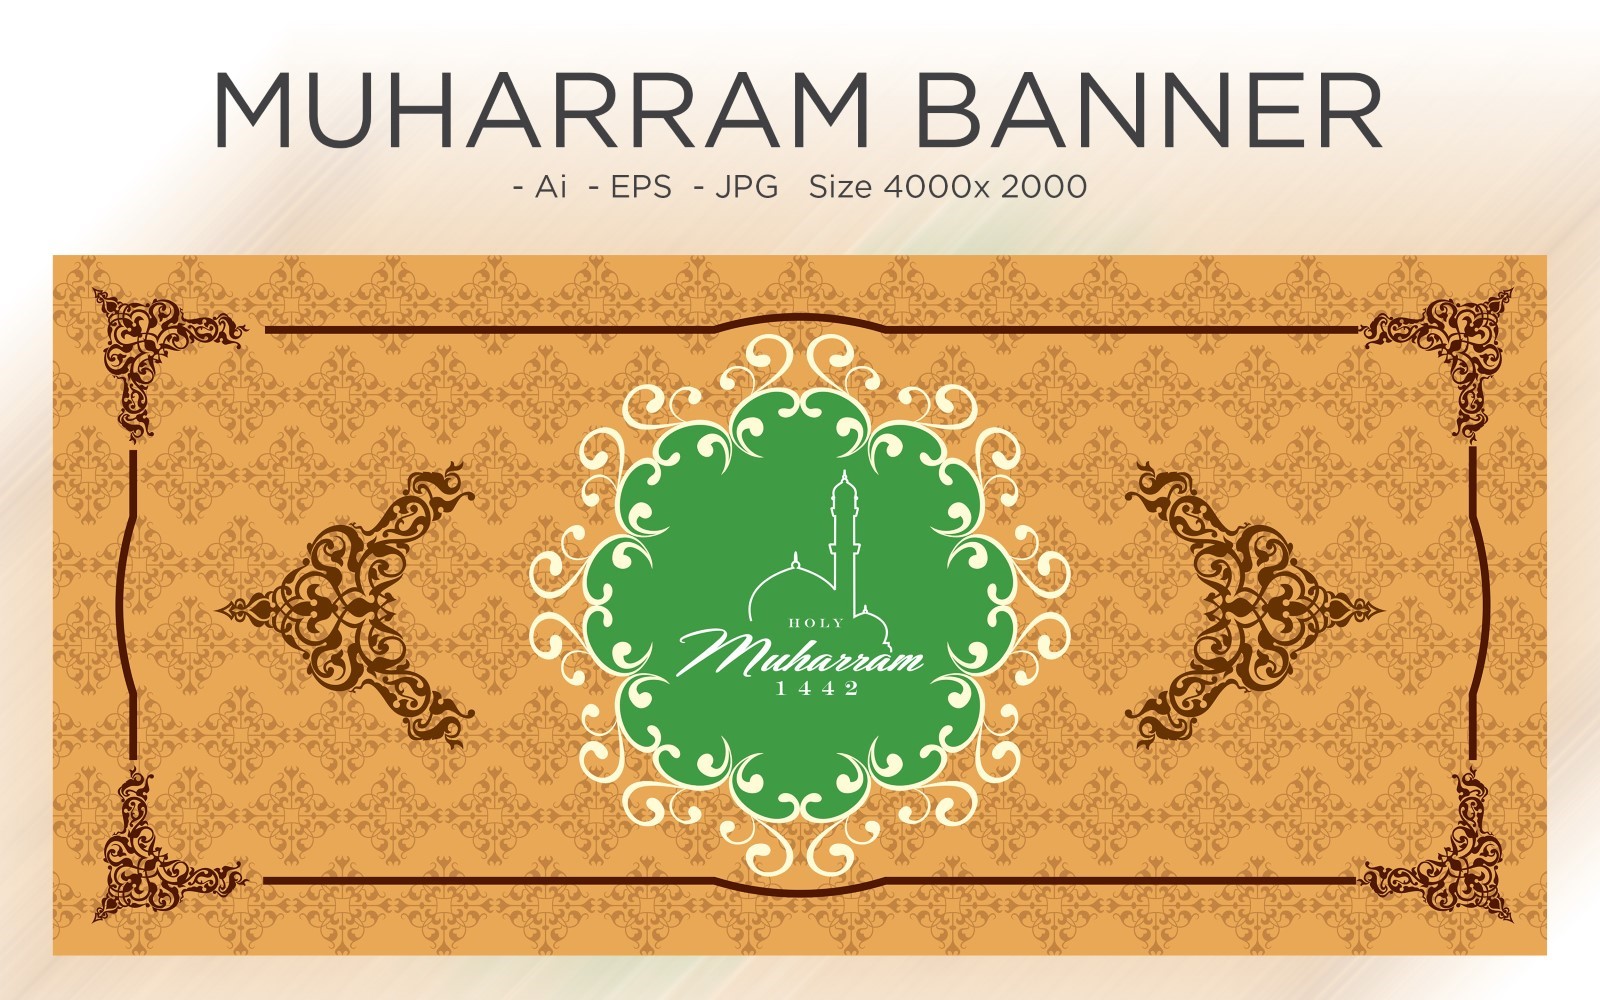 Muharram Mosques Dome and Islamic pattern  banner - Illustration